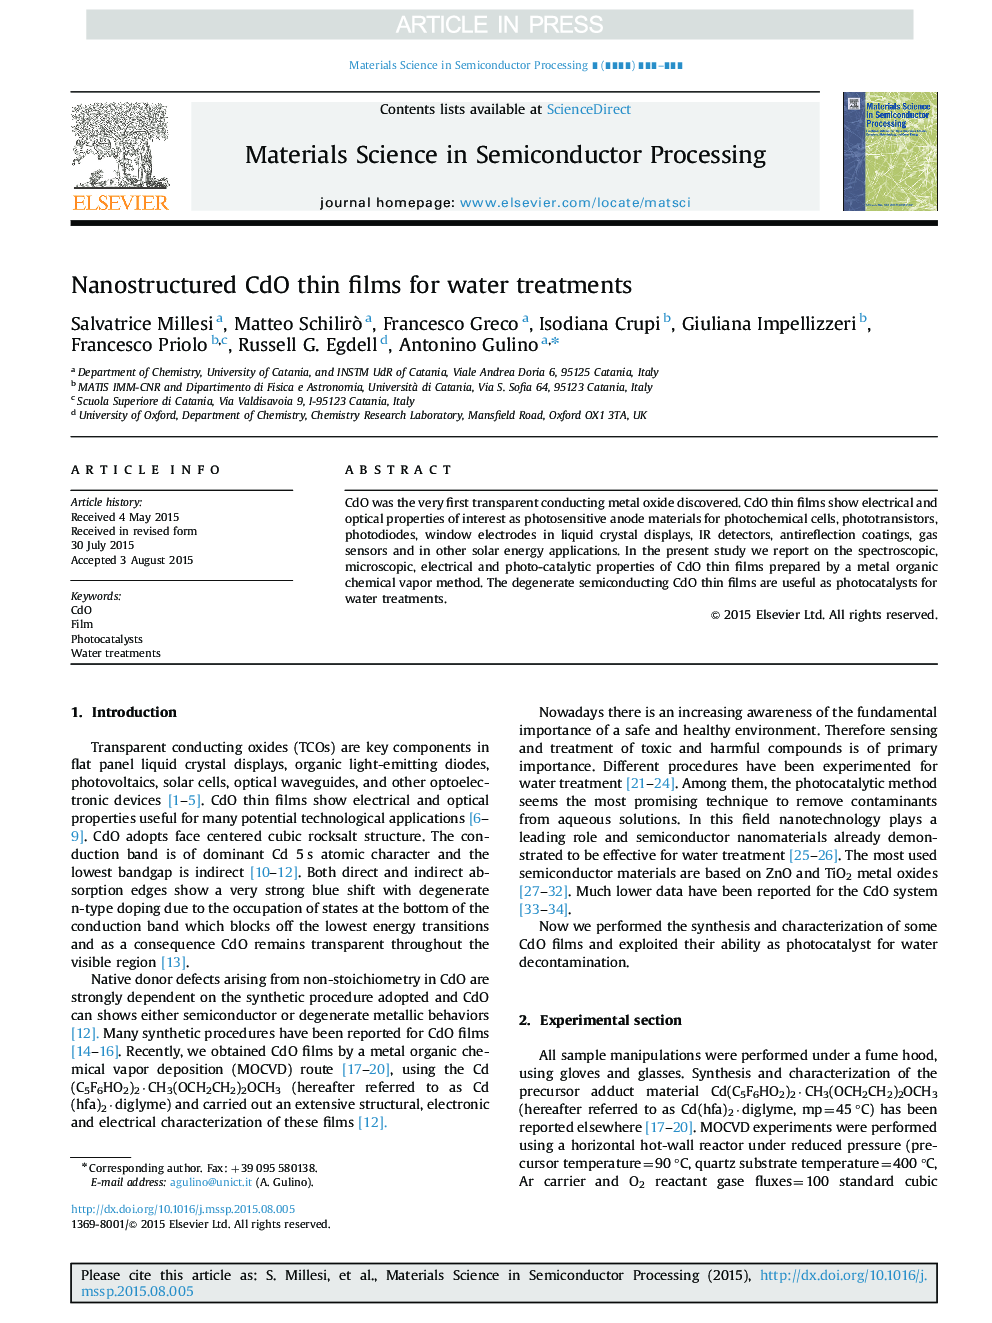 Nanostructured CdO thin films for water treatments